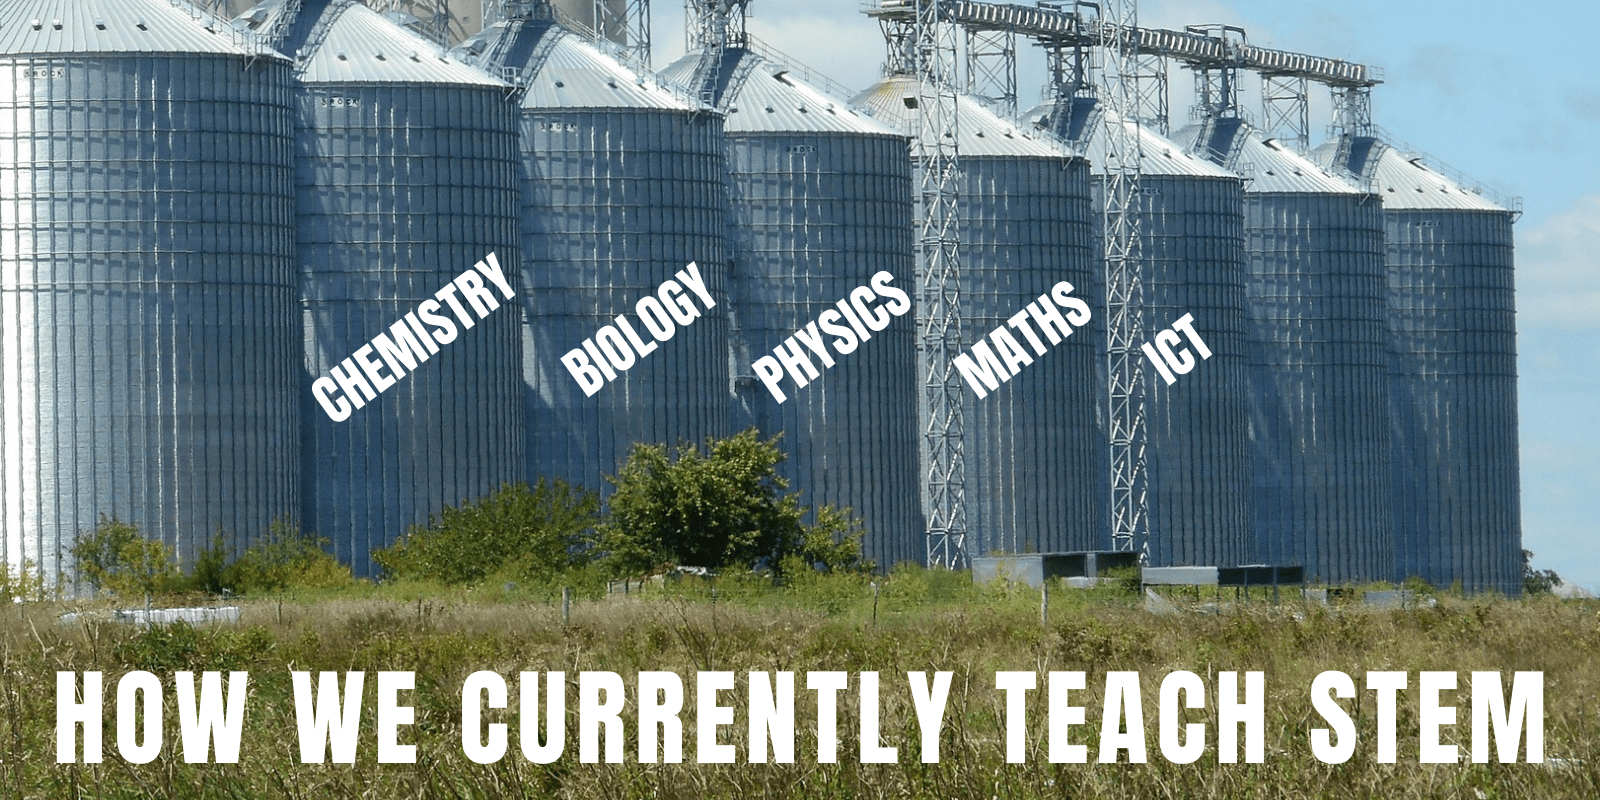 Geography STEM silo tanks are analogous to how teachers currently teach stem